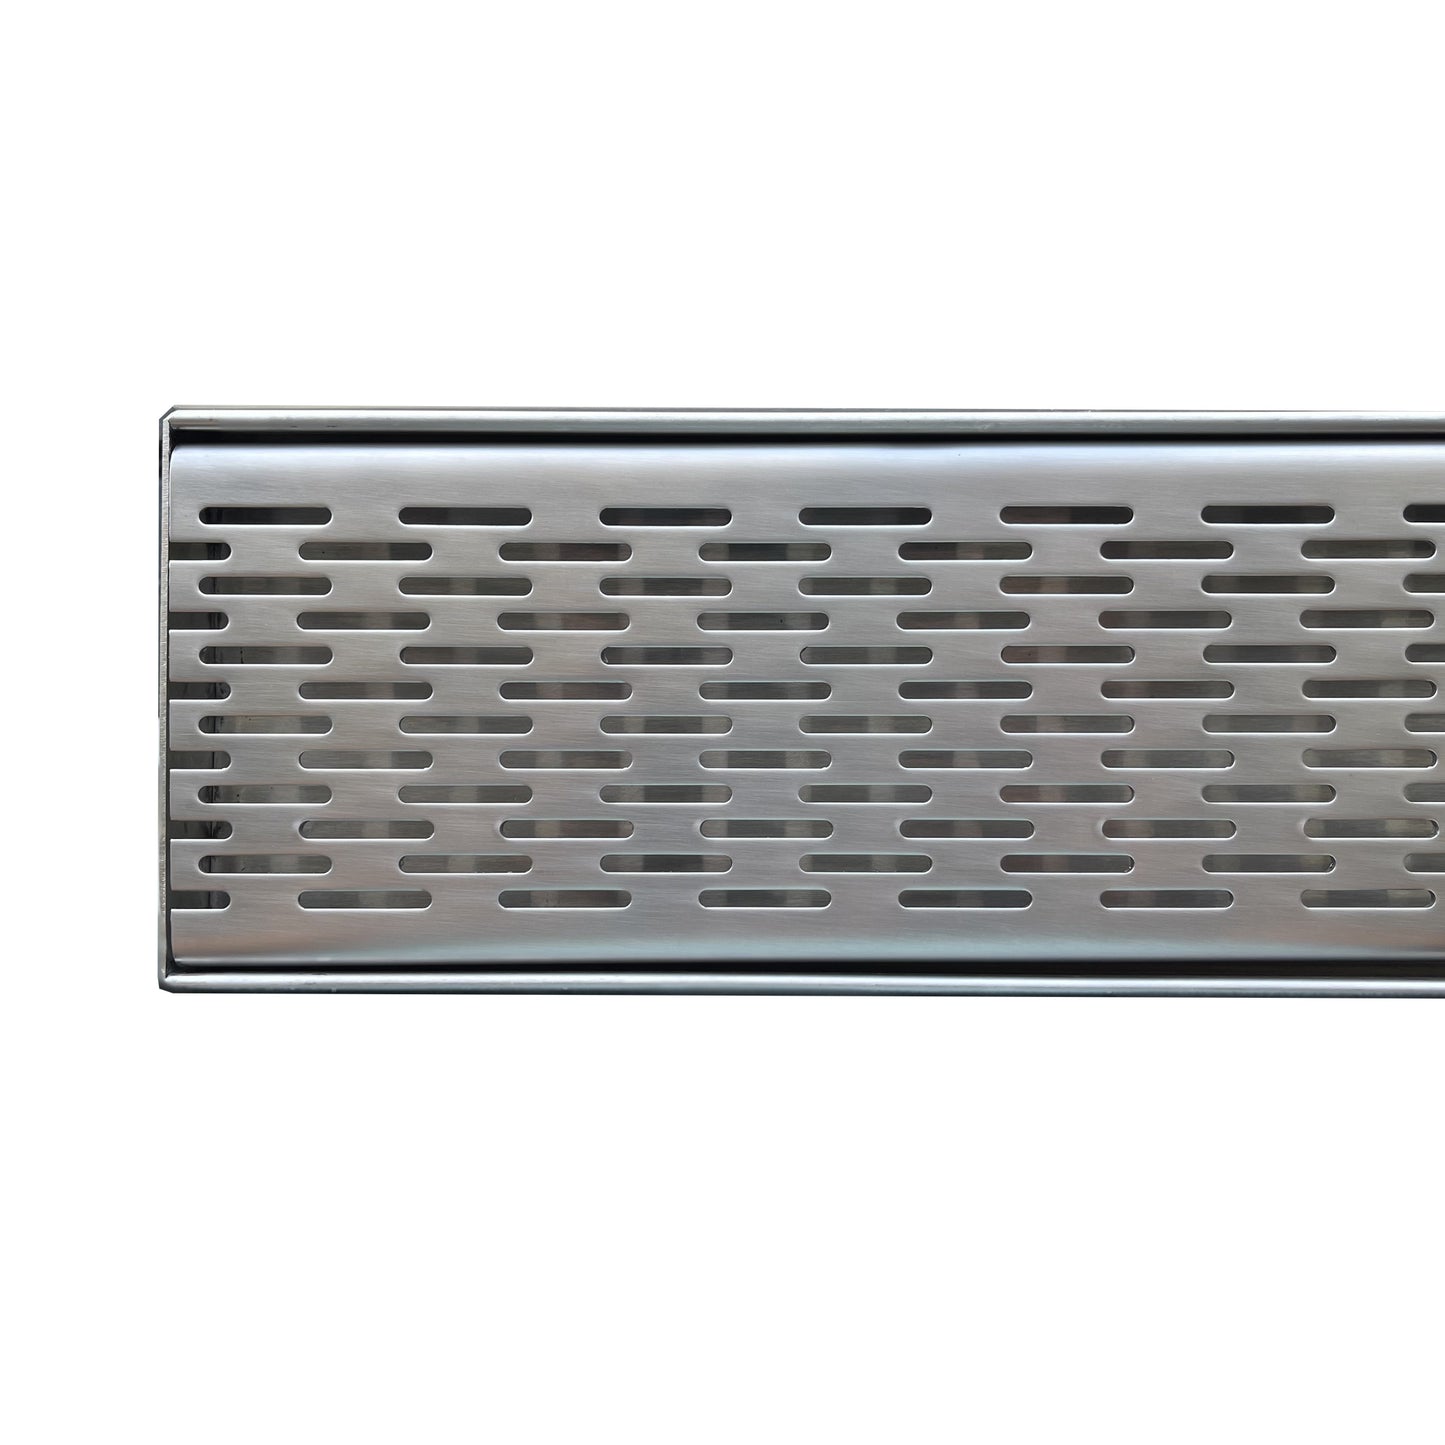 Custom Made Brick Pattern Grate & Channel Drain - Stainless Steel